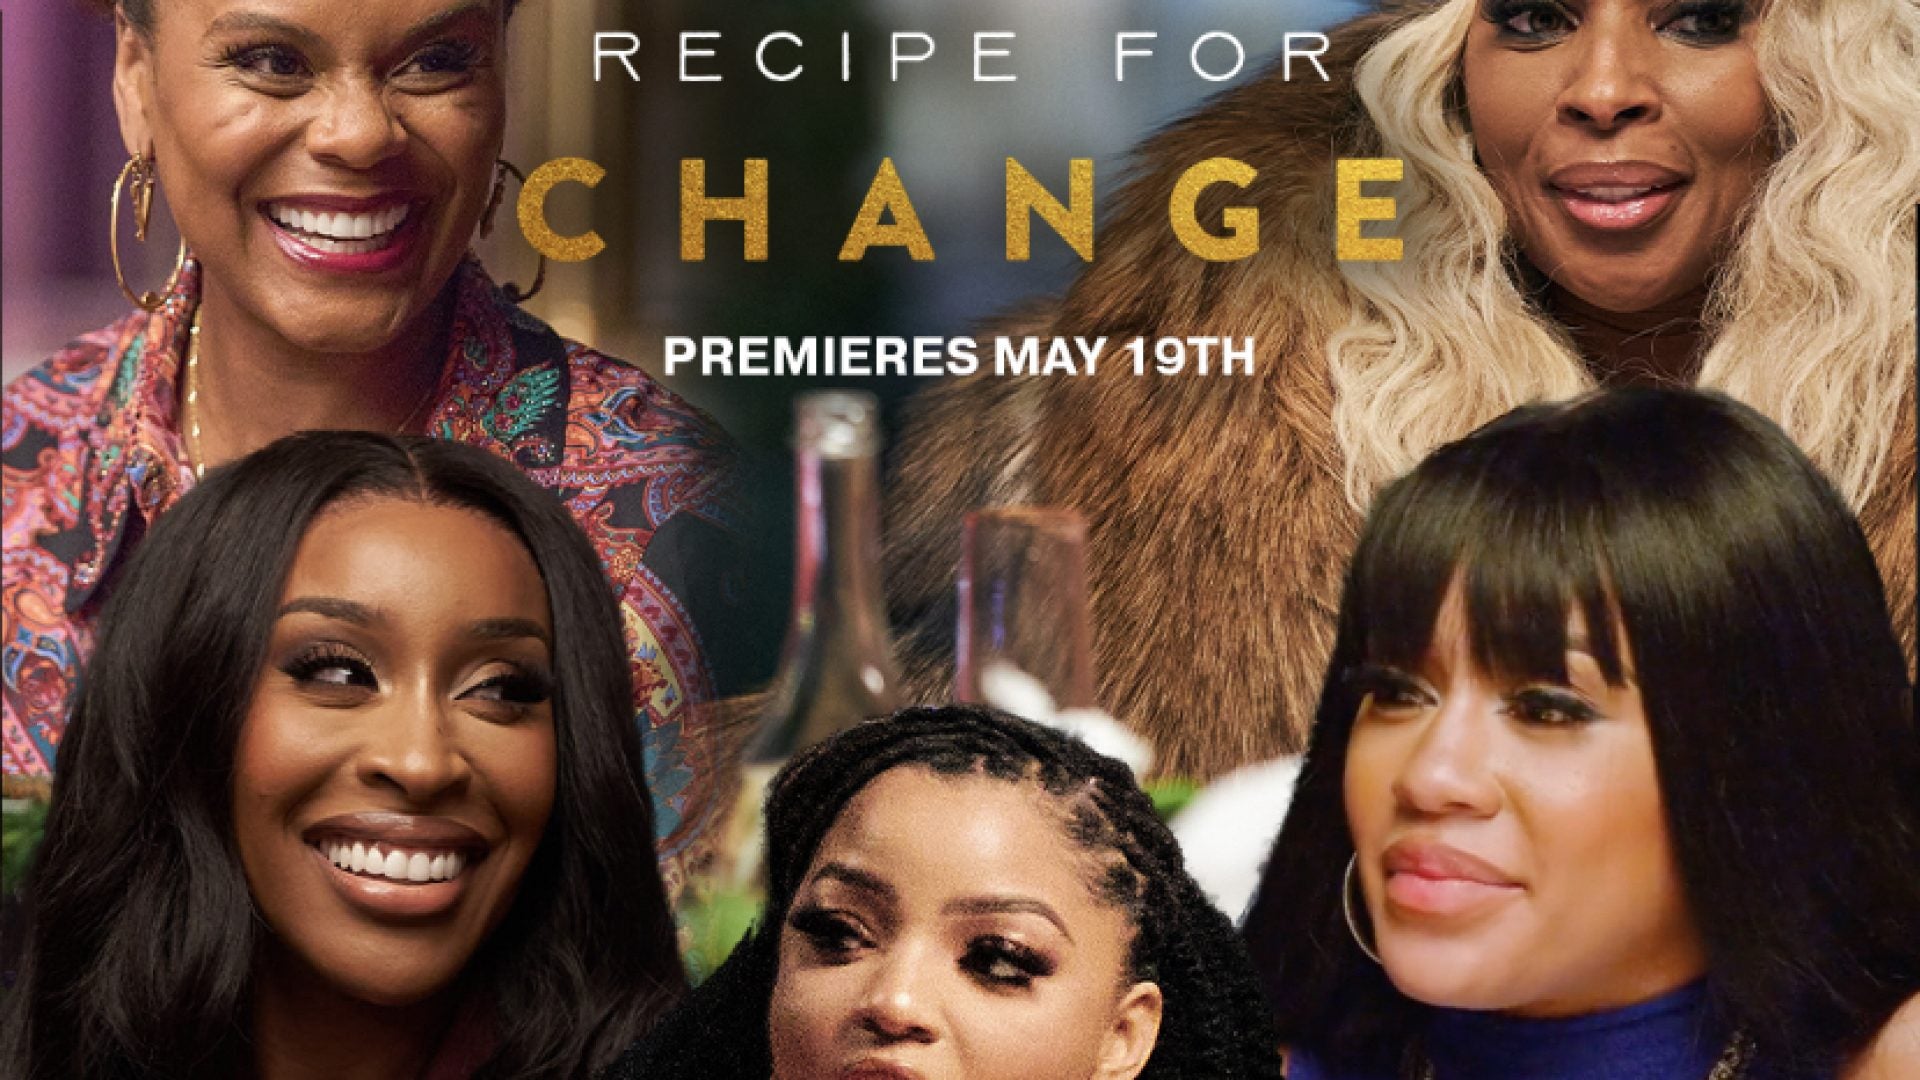 First Look: Watch The Trailer For New YouTube Special ‘Recipe For Change: Amplifying Black Women’